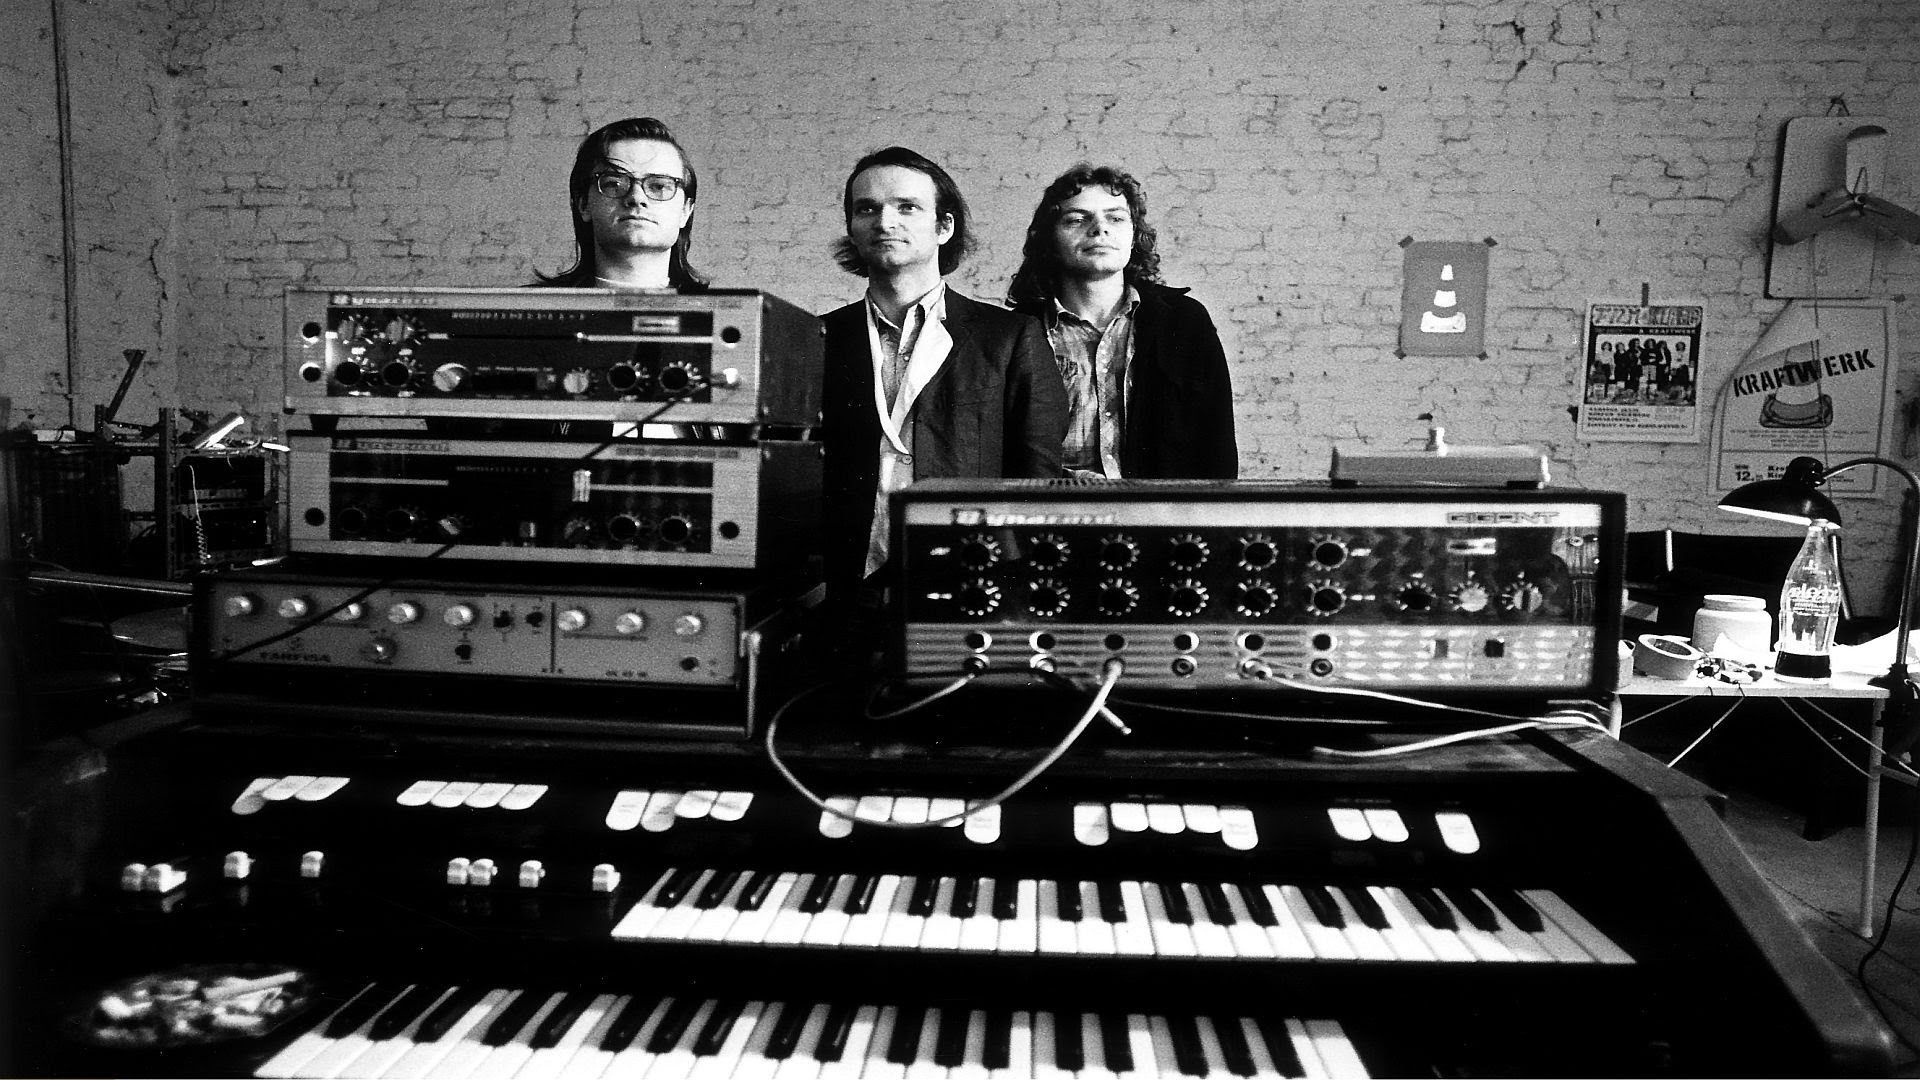 Kraftwerk band formation, First concert appearance, Soest West Germany, Electronic music influence, 1920x1080 Full HD Desktop